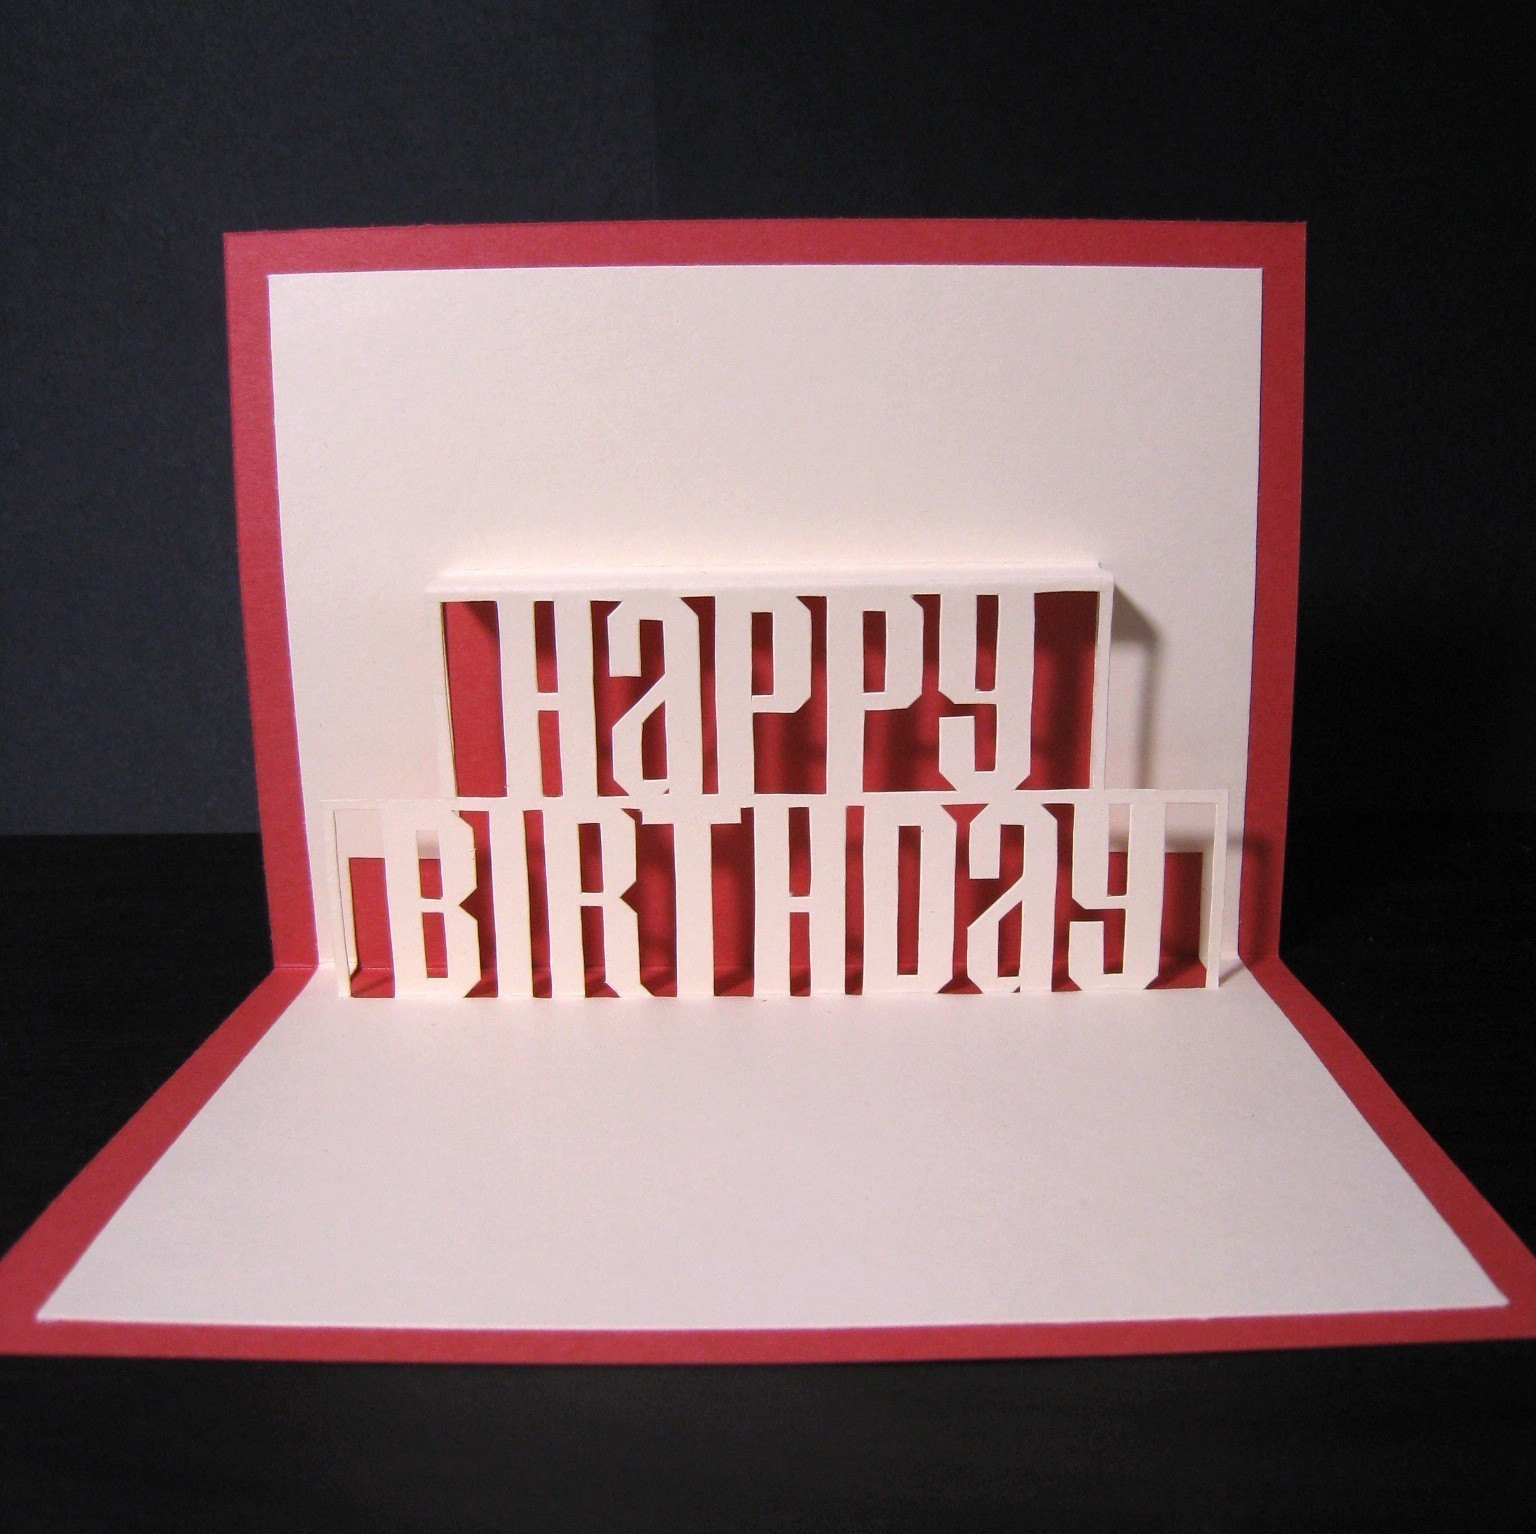 Happy Birthday Pop Up Card
 Happy Birthday Pop Up Card by CookieBits on Etsy